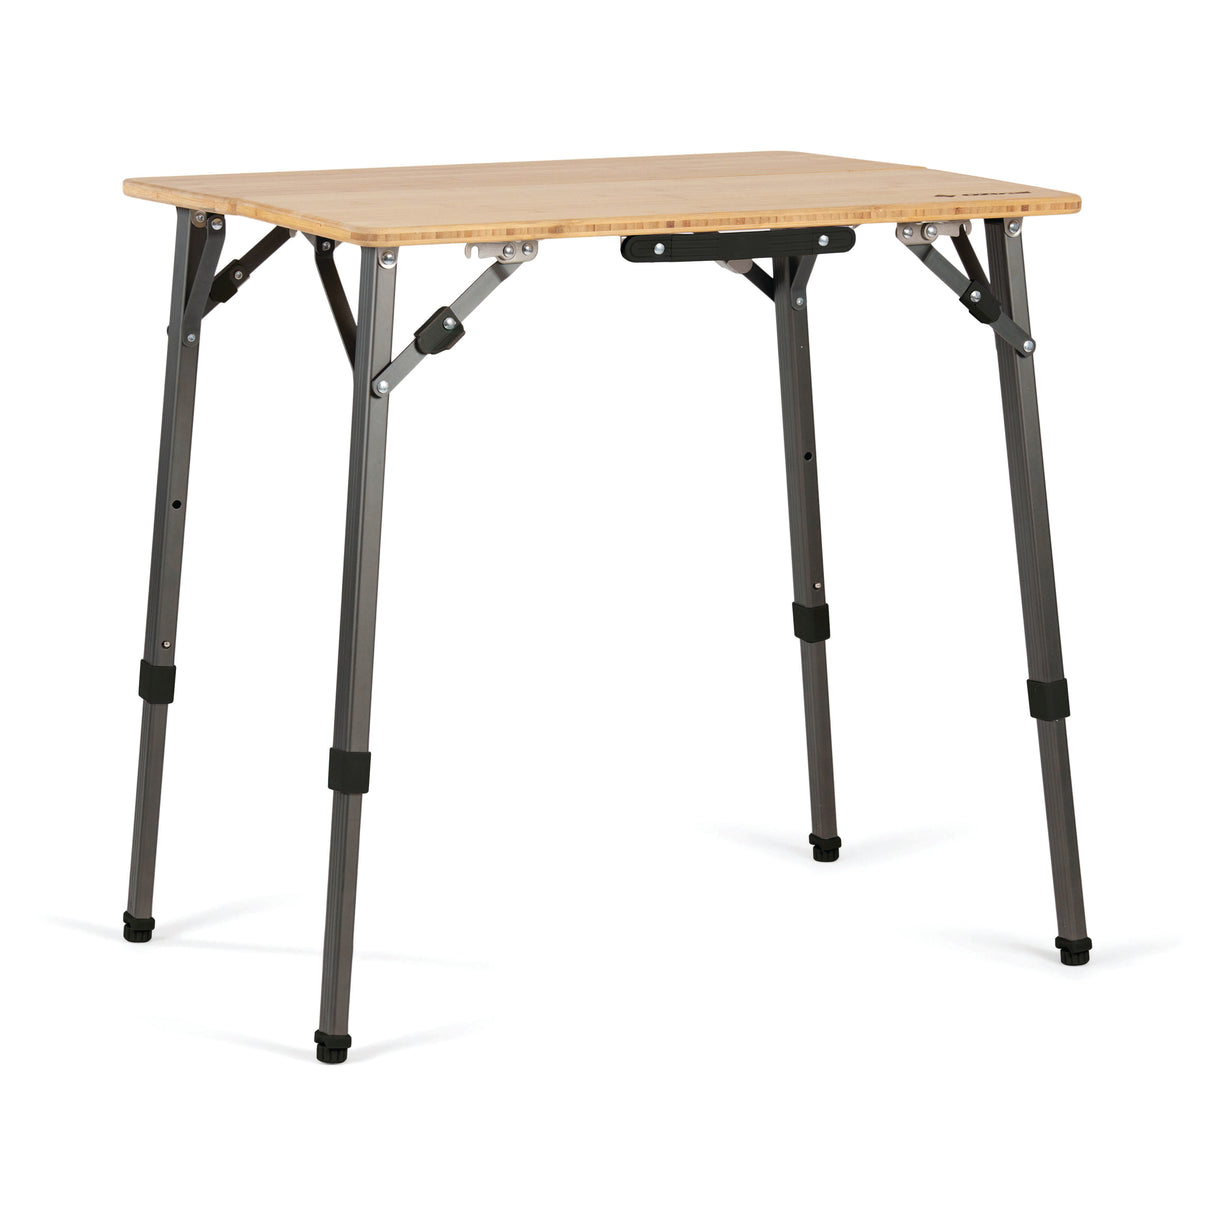 OZtrail Bamboo Table 65cm